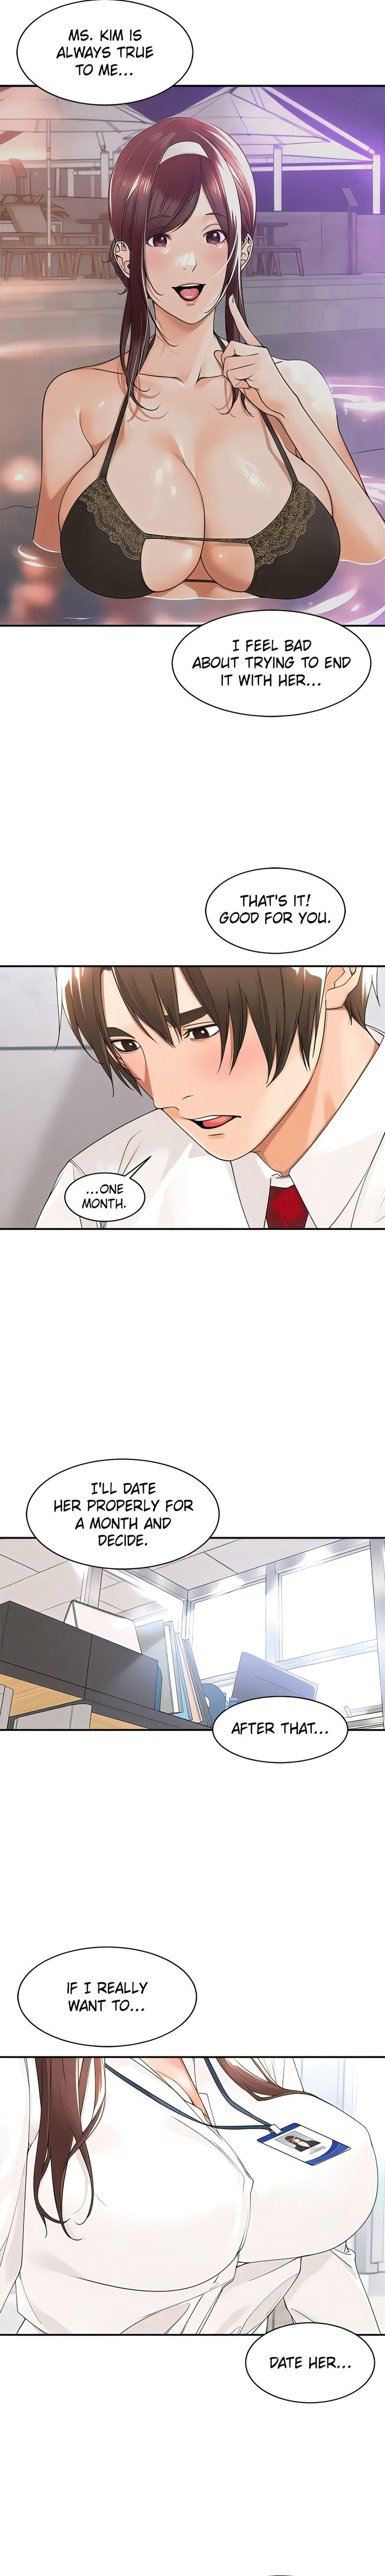 Manager, Please Scold Me - Chapter 22 Page 2